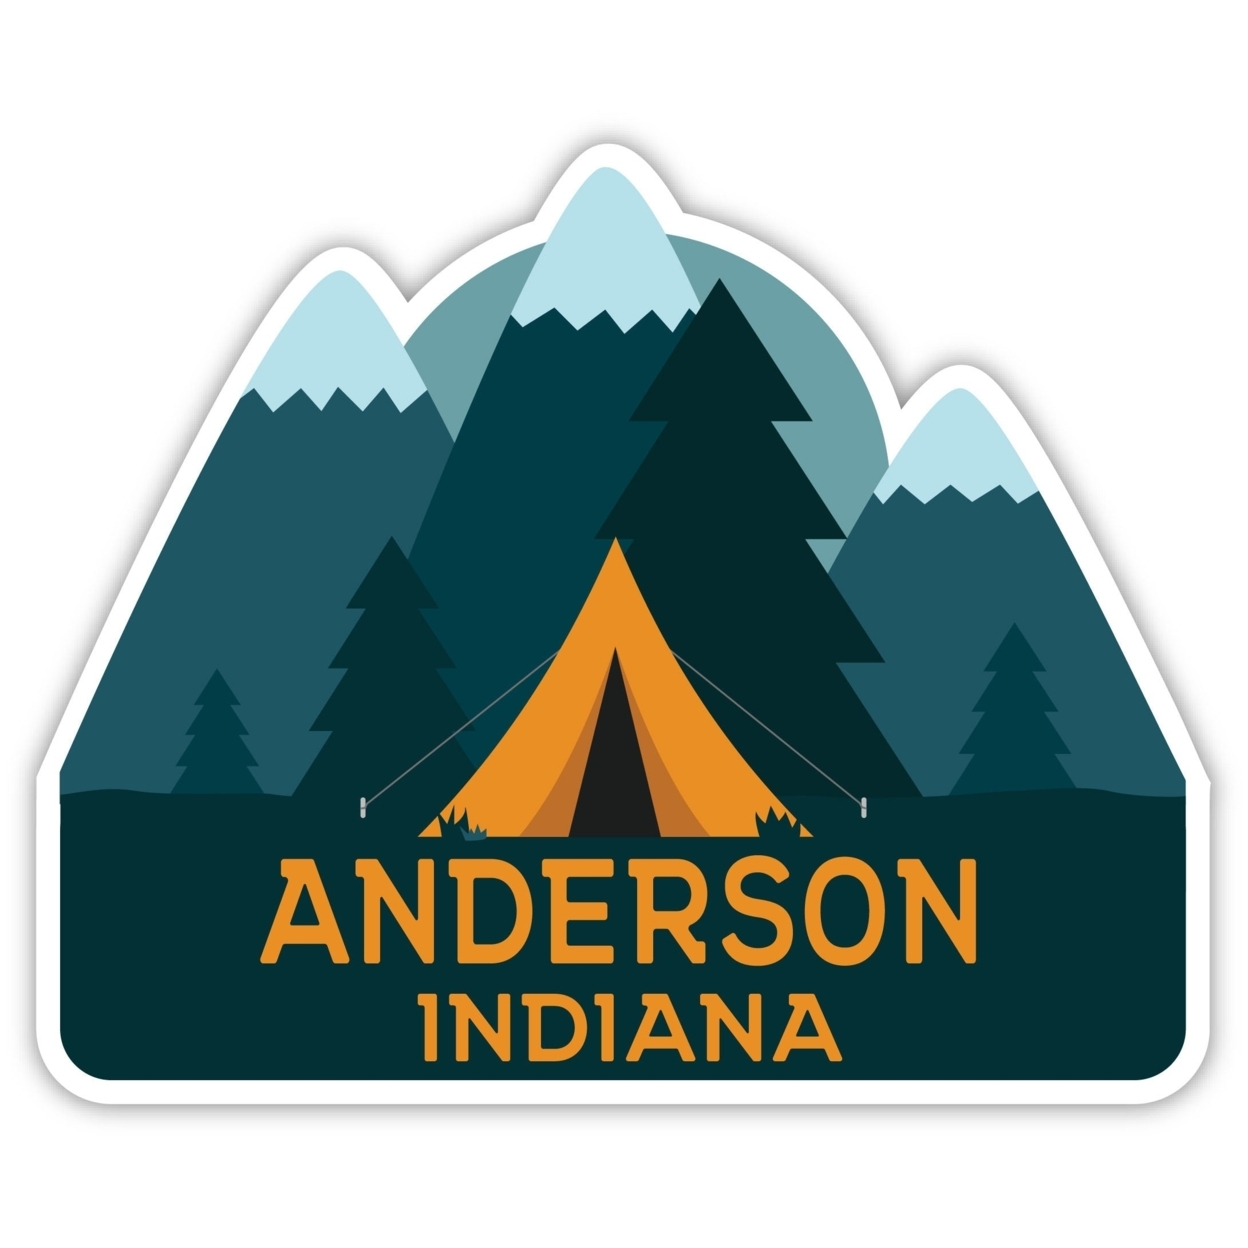 Anderson Indiana Souvenir Decorative Stickers (Choose Theme And Size) - 4-Pack, 6-Inch, Tent